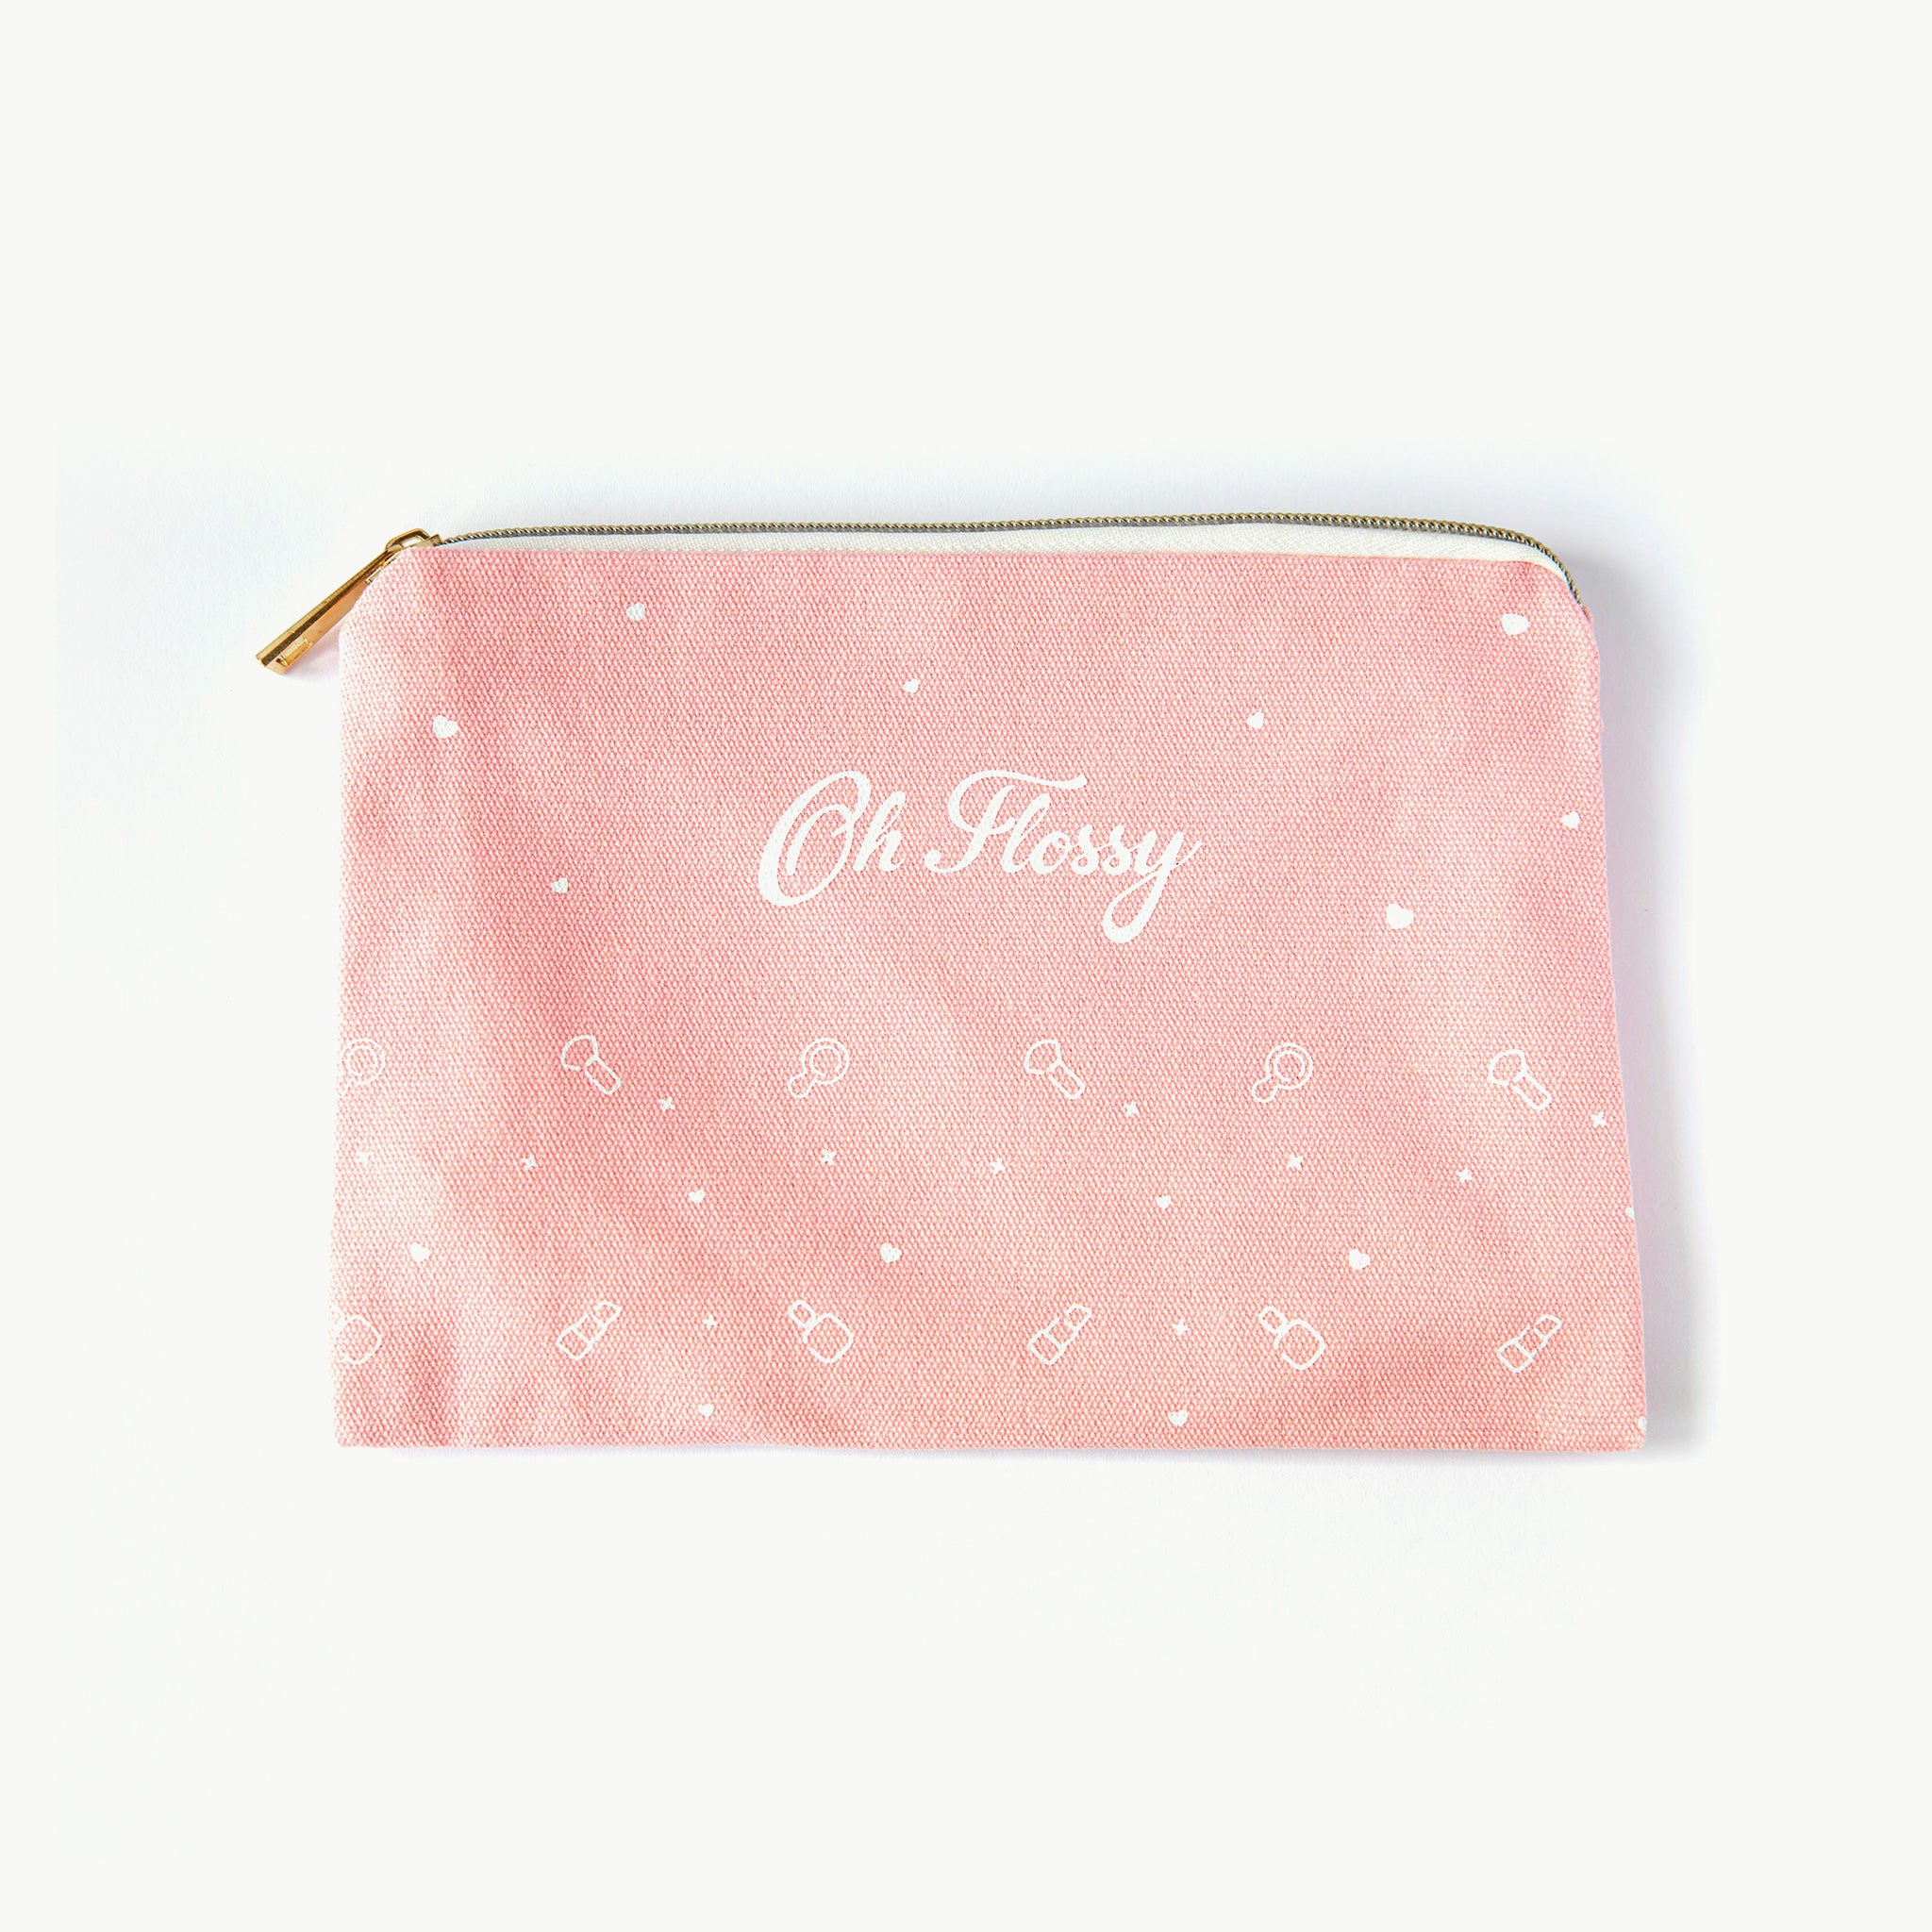 Oh Flossy Cosmetic Bag